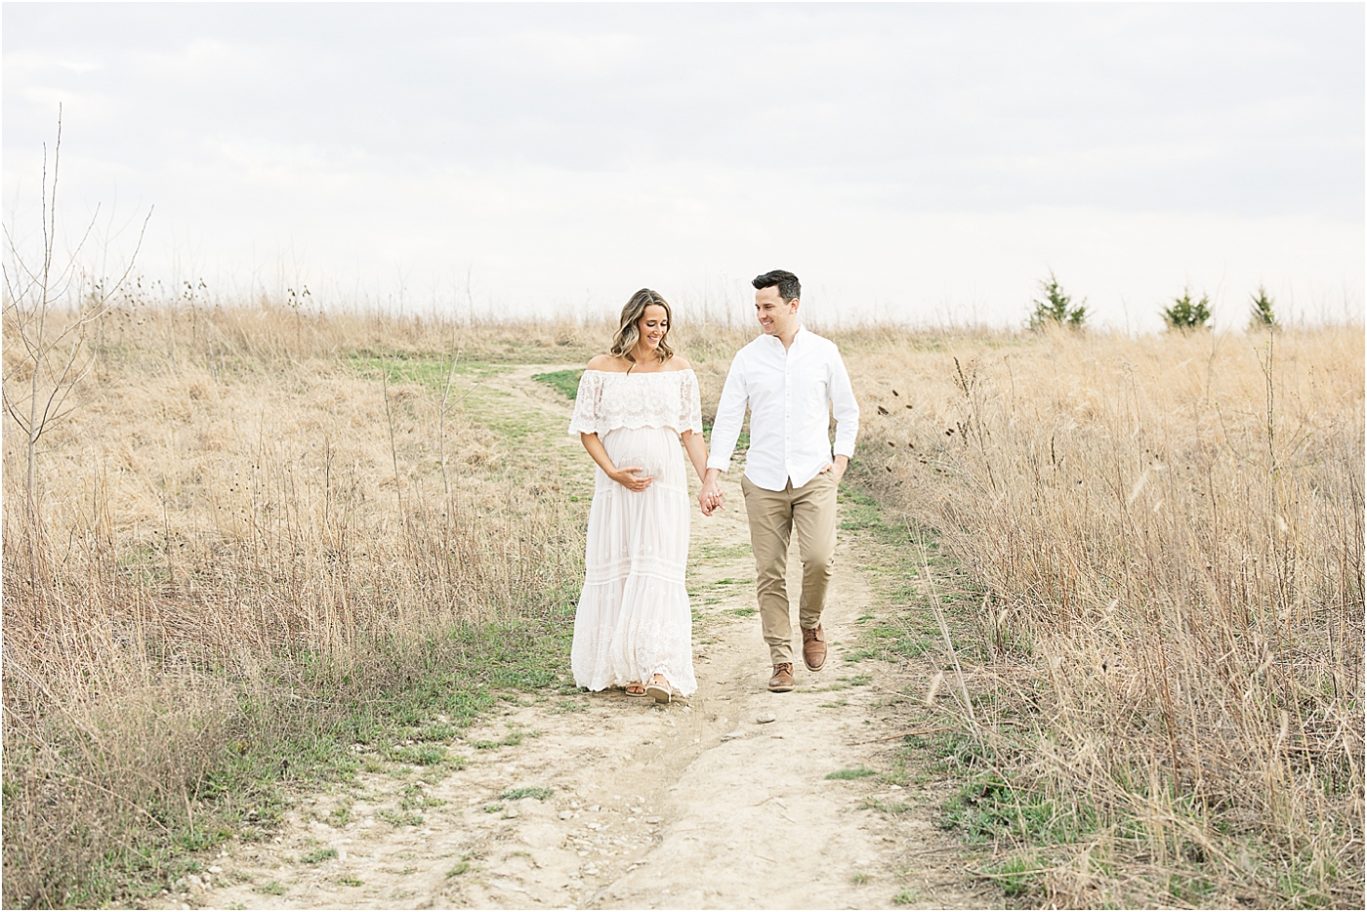 Parents to be walking through a field for maternity session with Lindsay Konopa Photography in Broad Ripple IN.